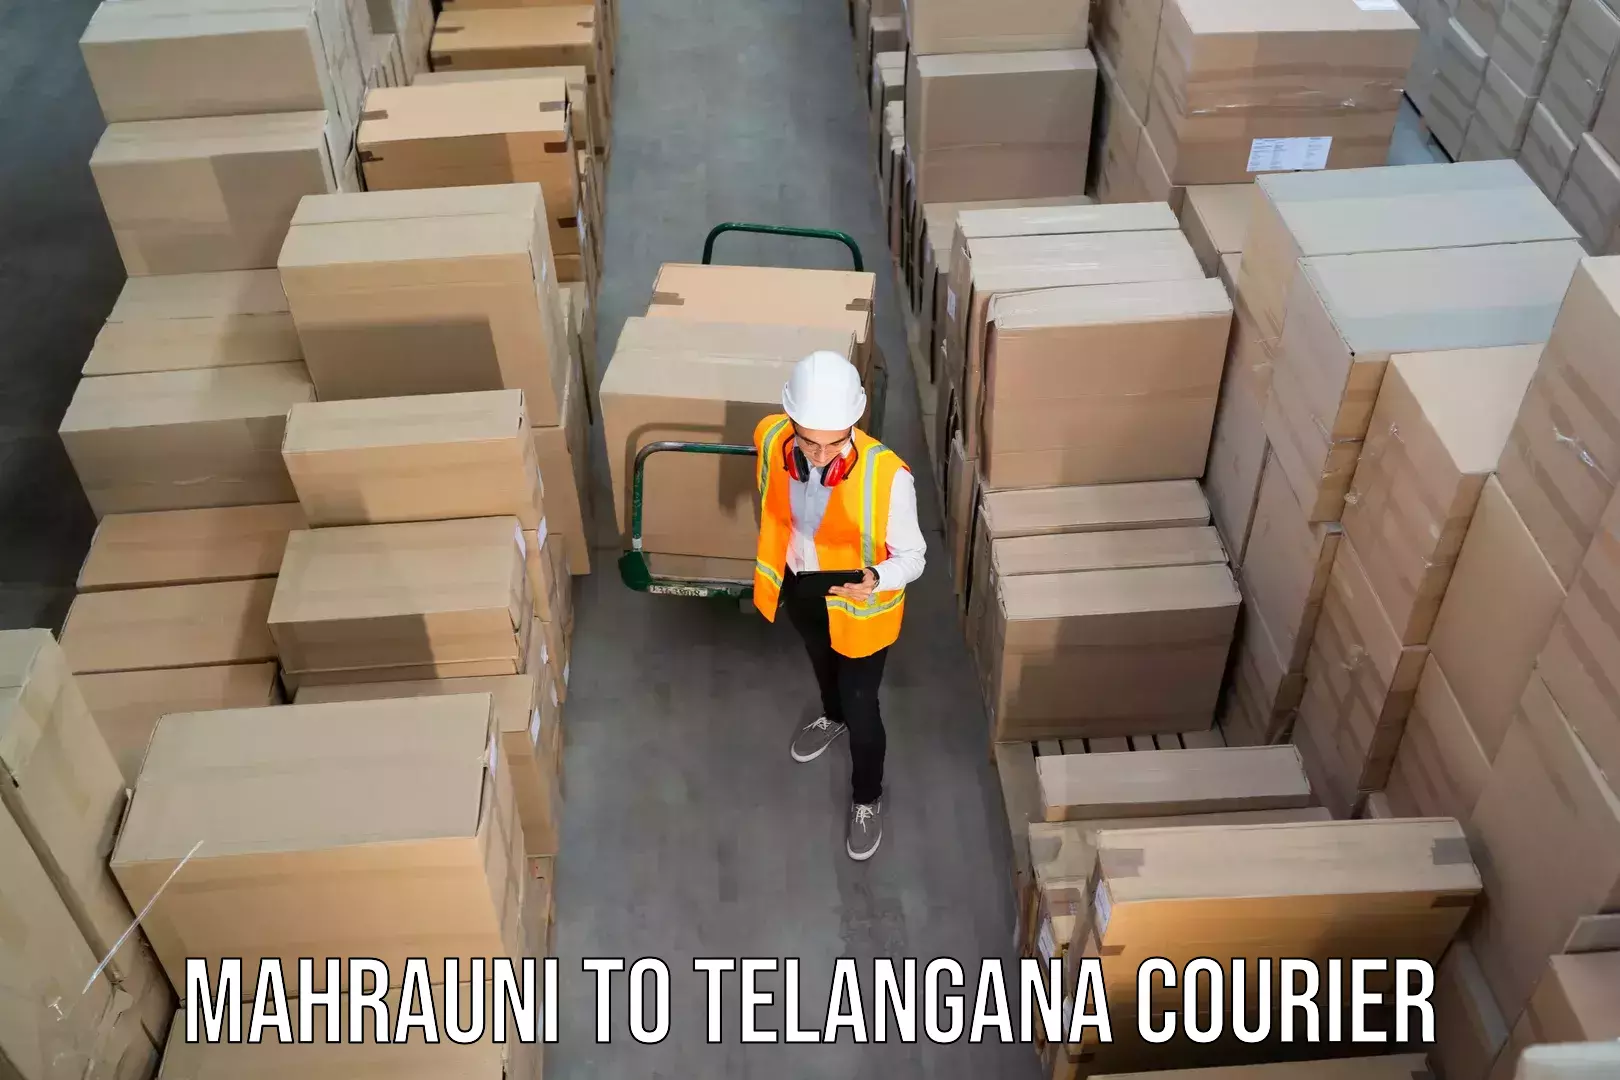 Comprehensive shipping network in Mahrauni to Kothagudem